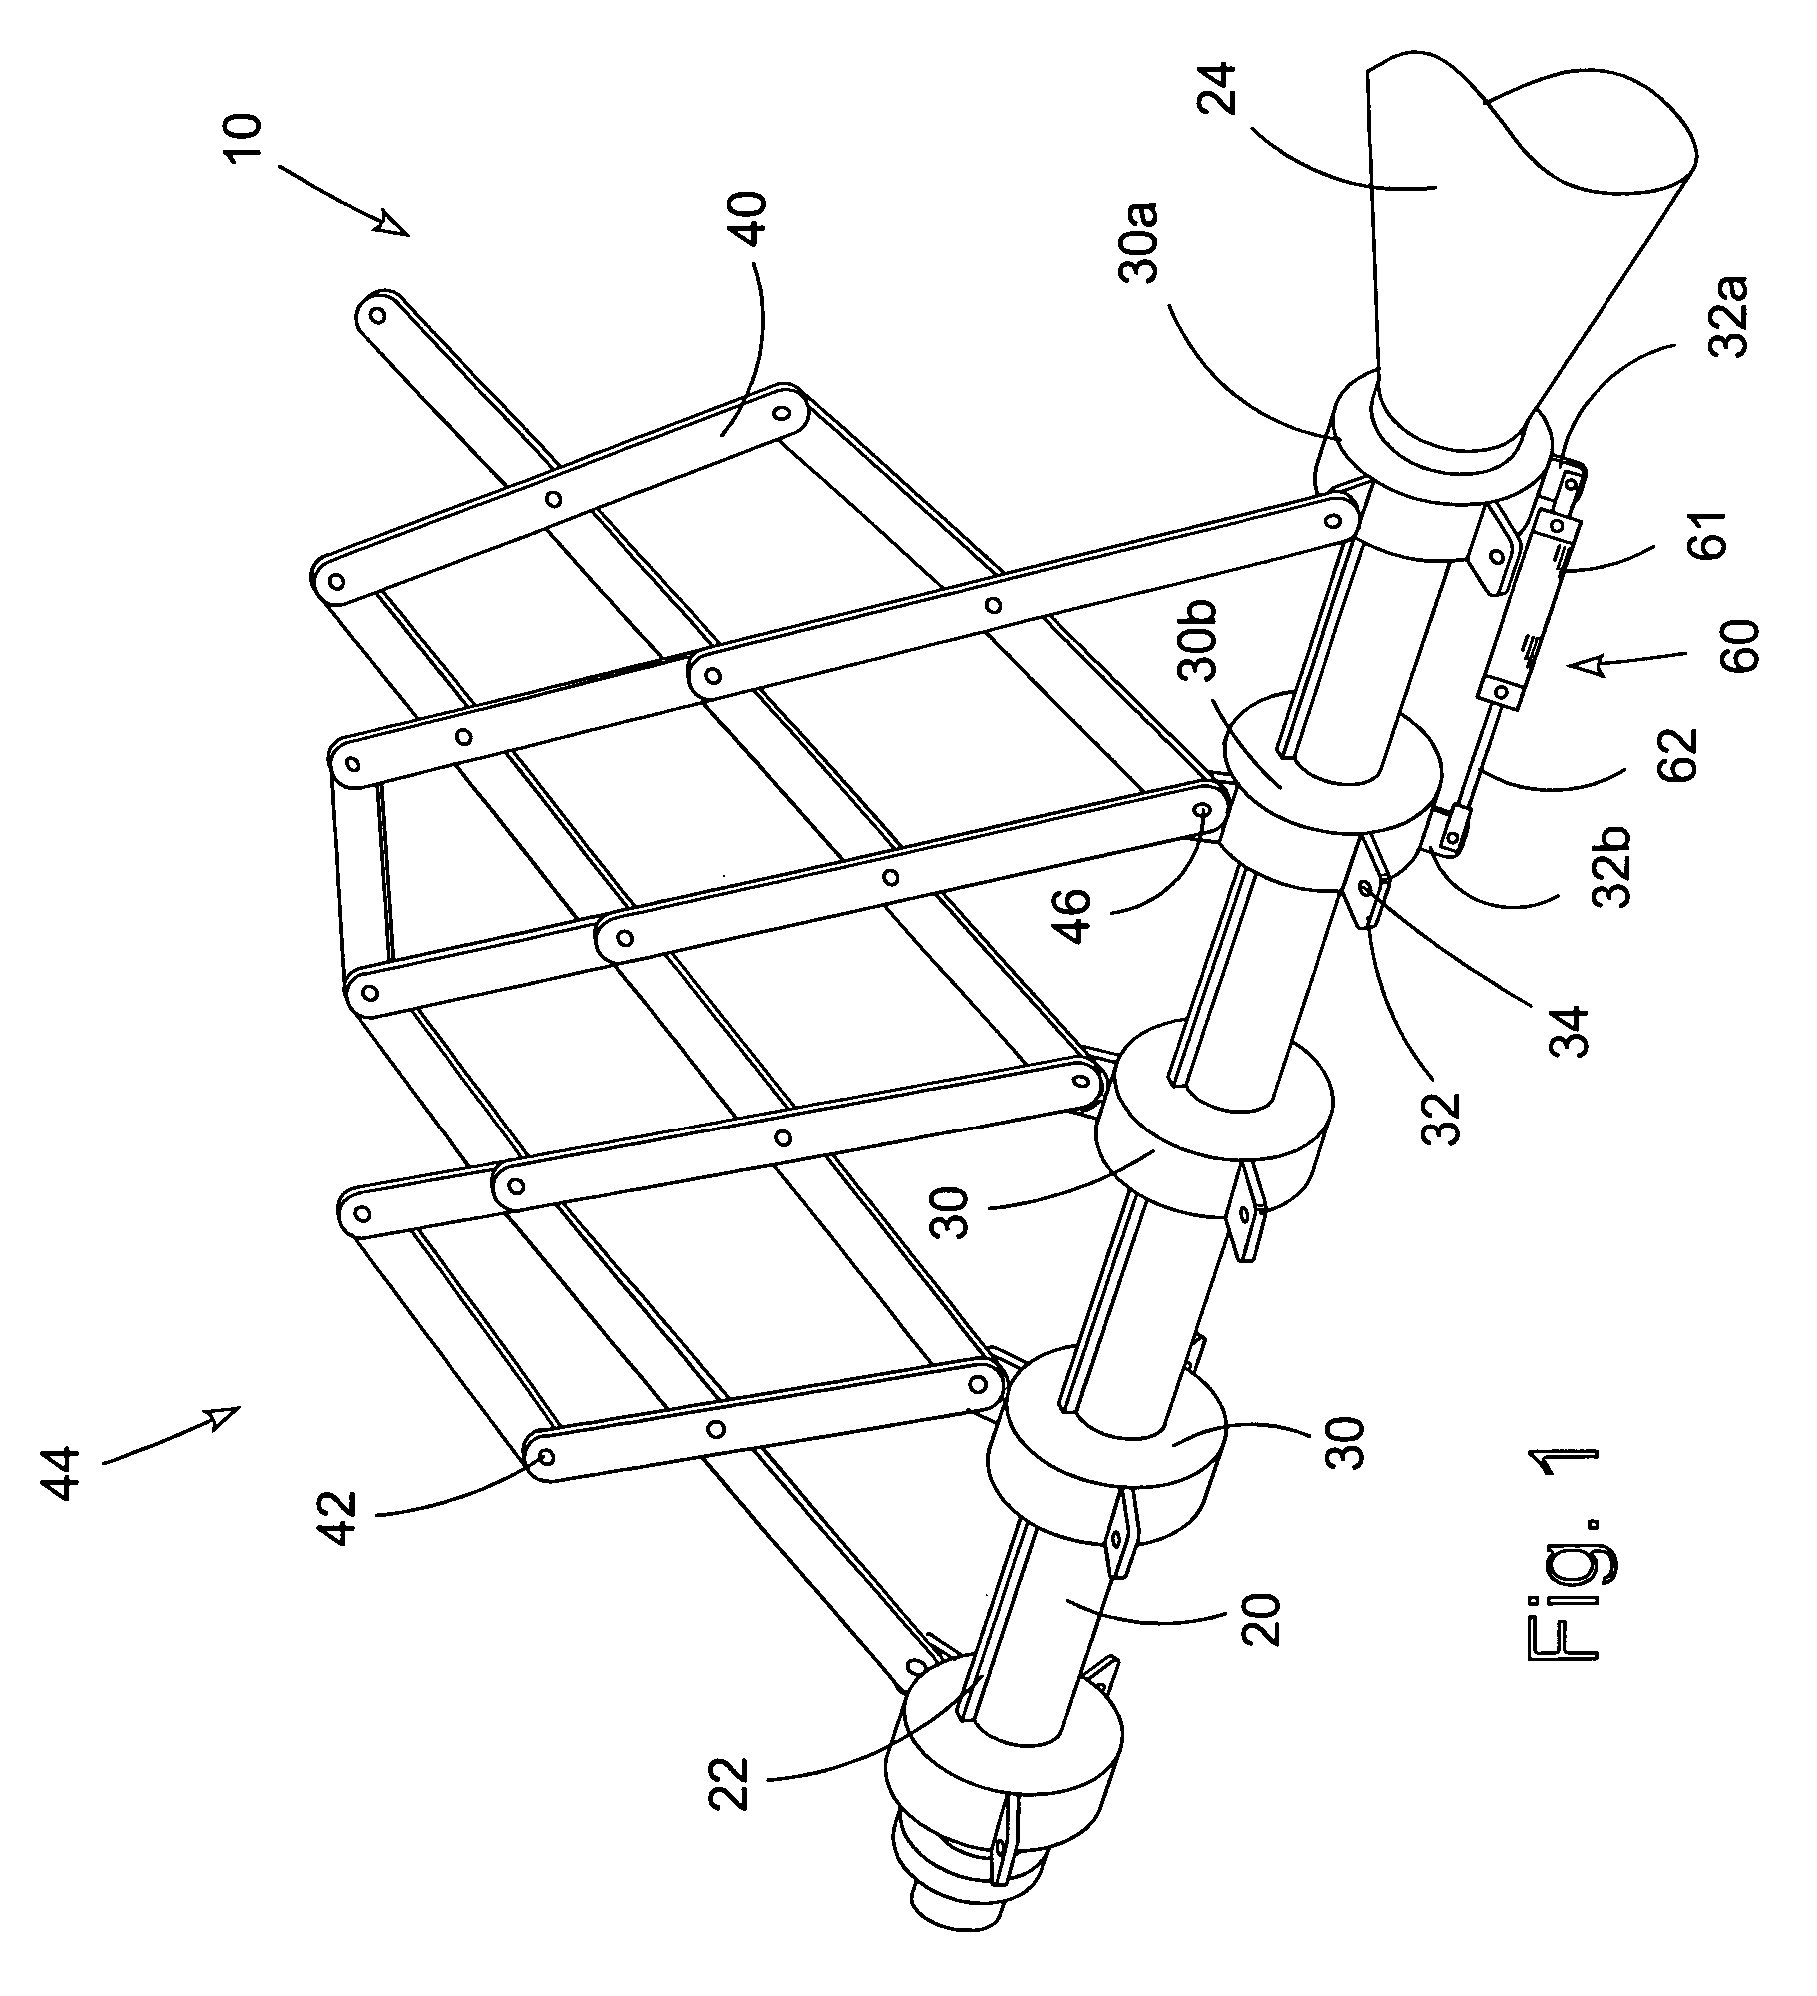 Propeller with variable geometry and method for varying geometry of a propeller